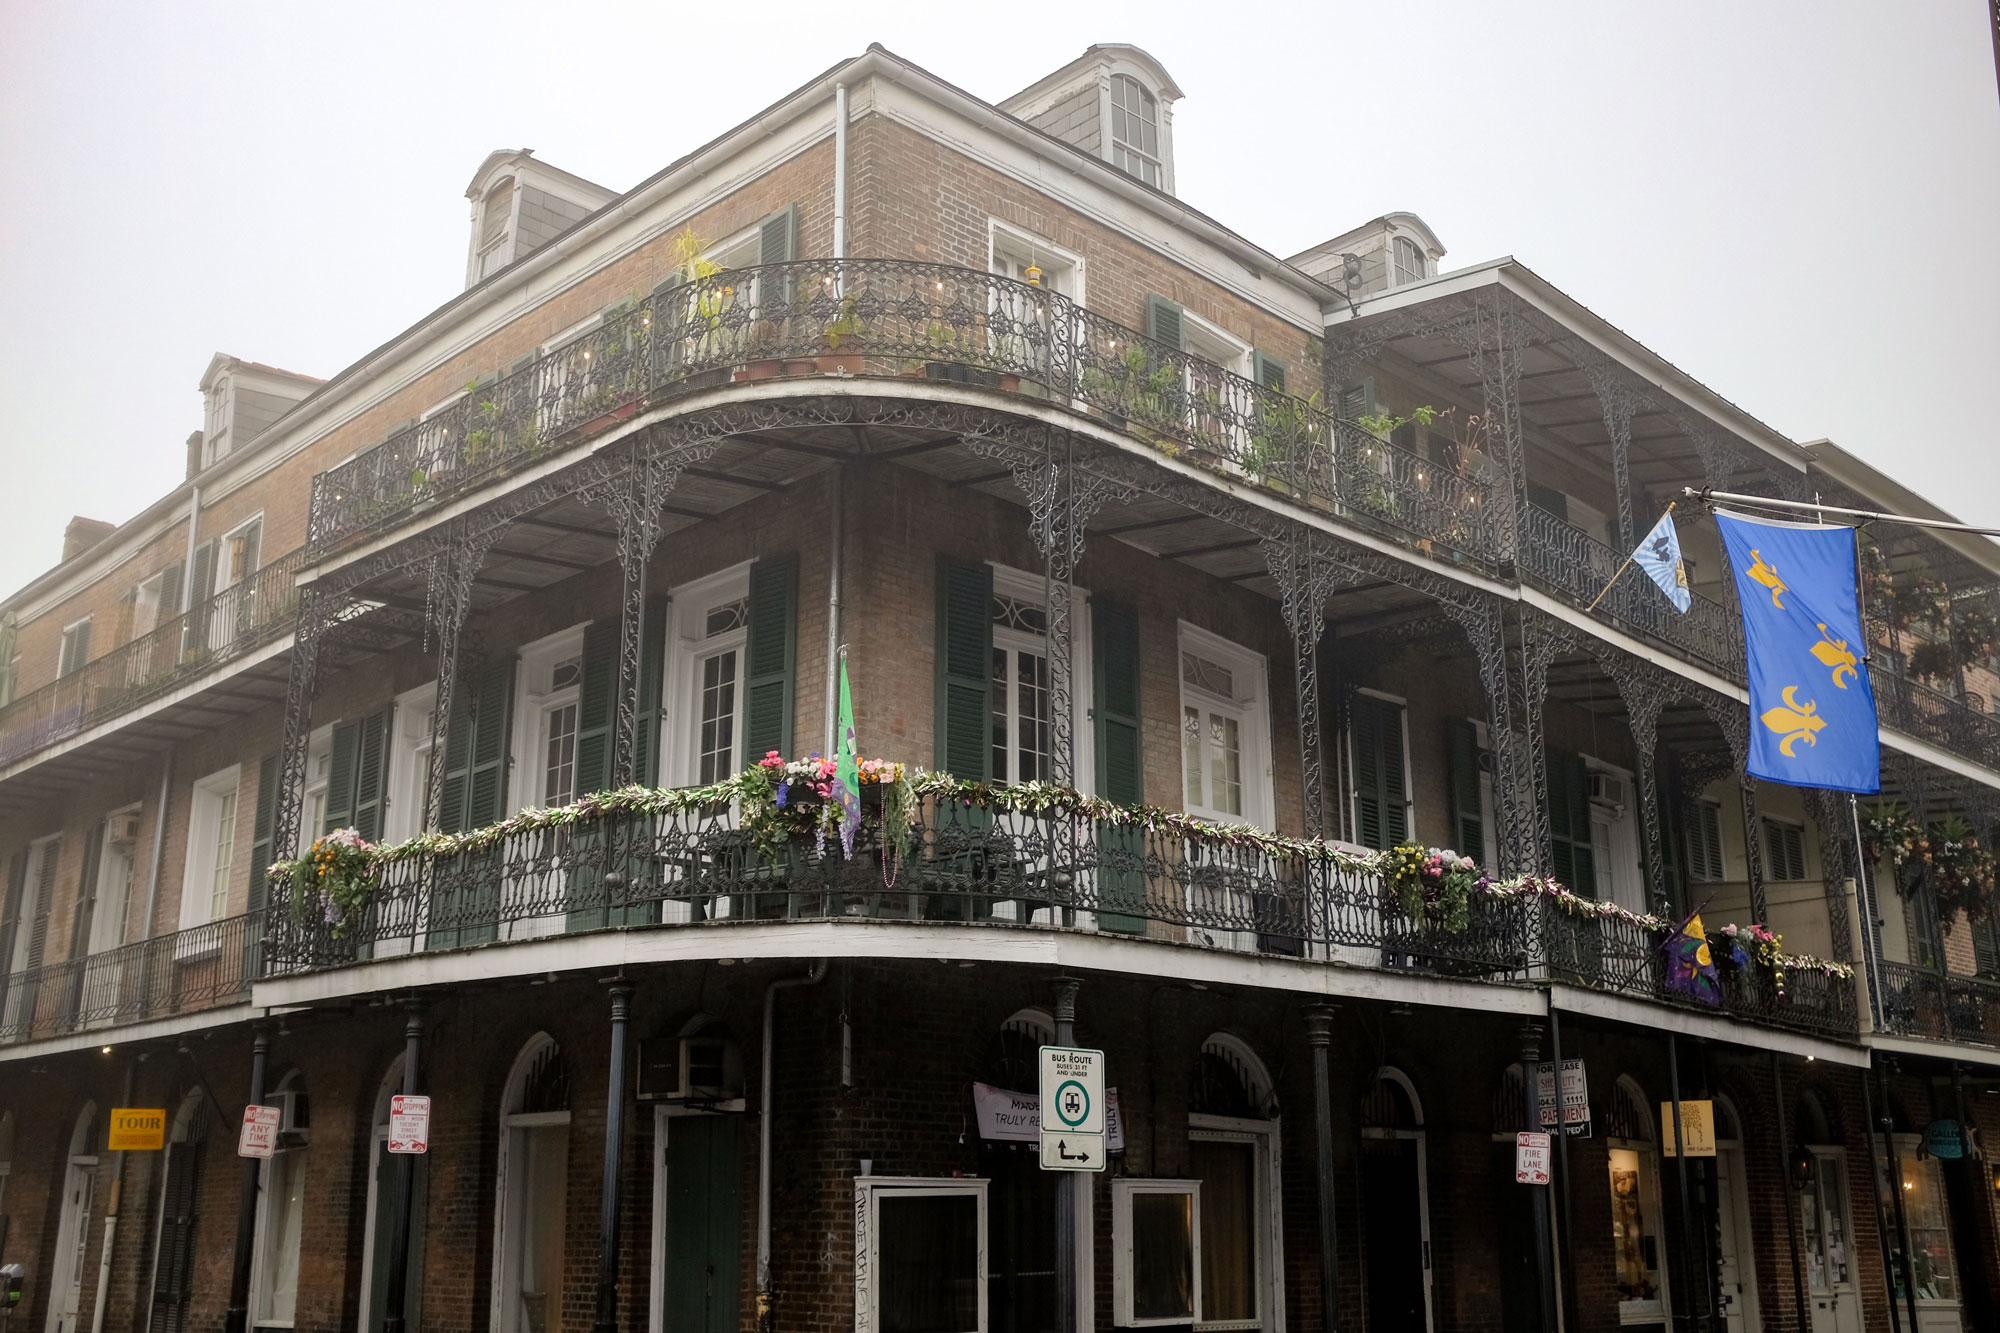 A typical building facade in the French Quarter